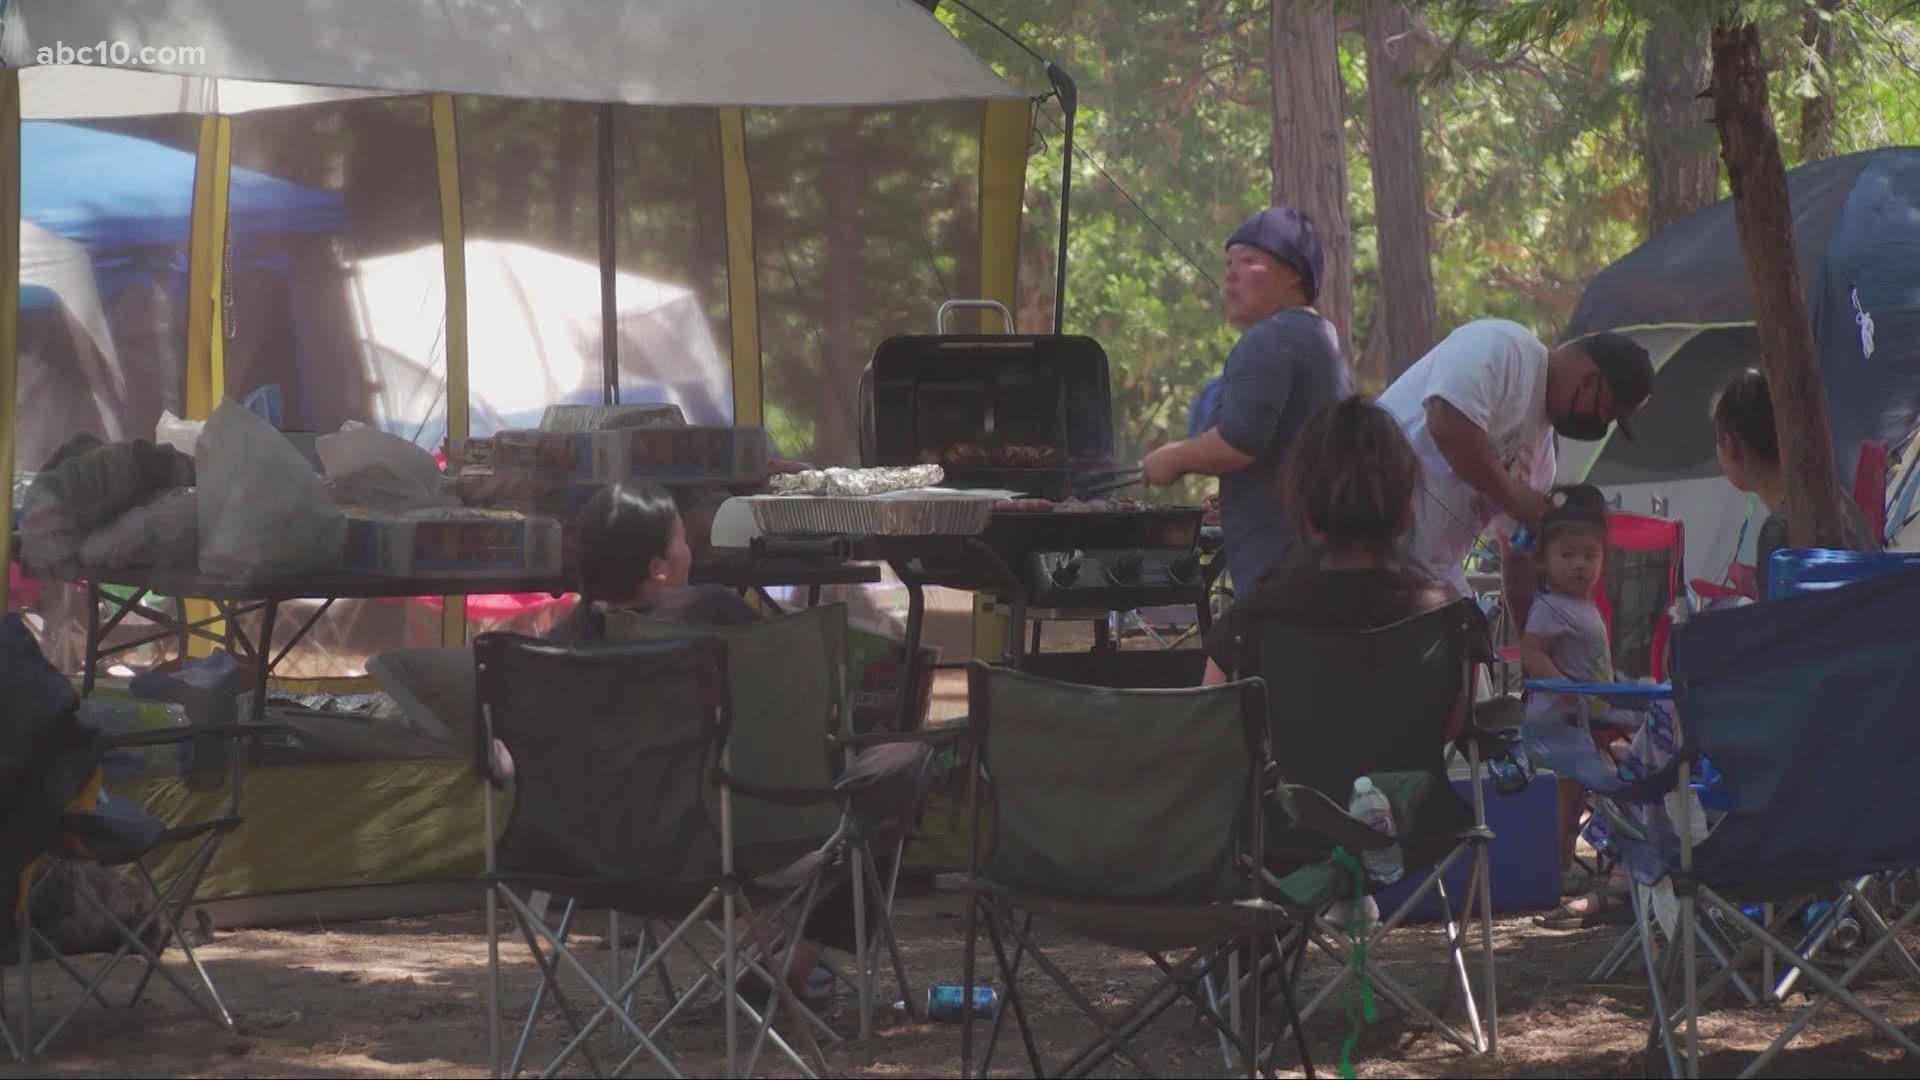 U.S. Forest Services officials said in a press conference the Eldorado National Forest is seeing three times the number of people from previous years.